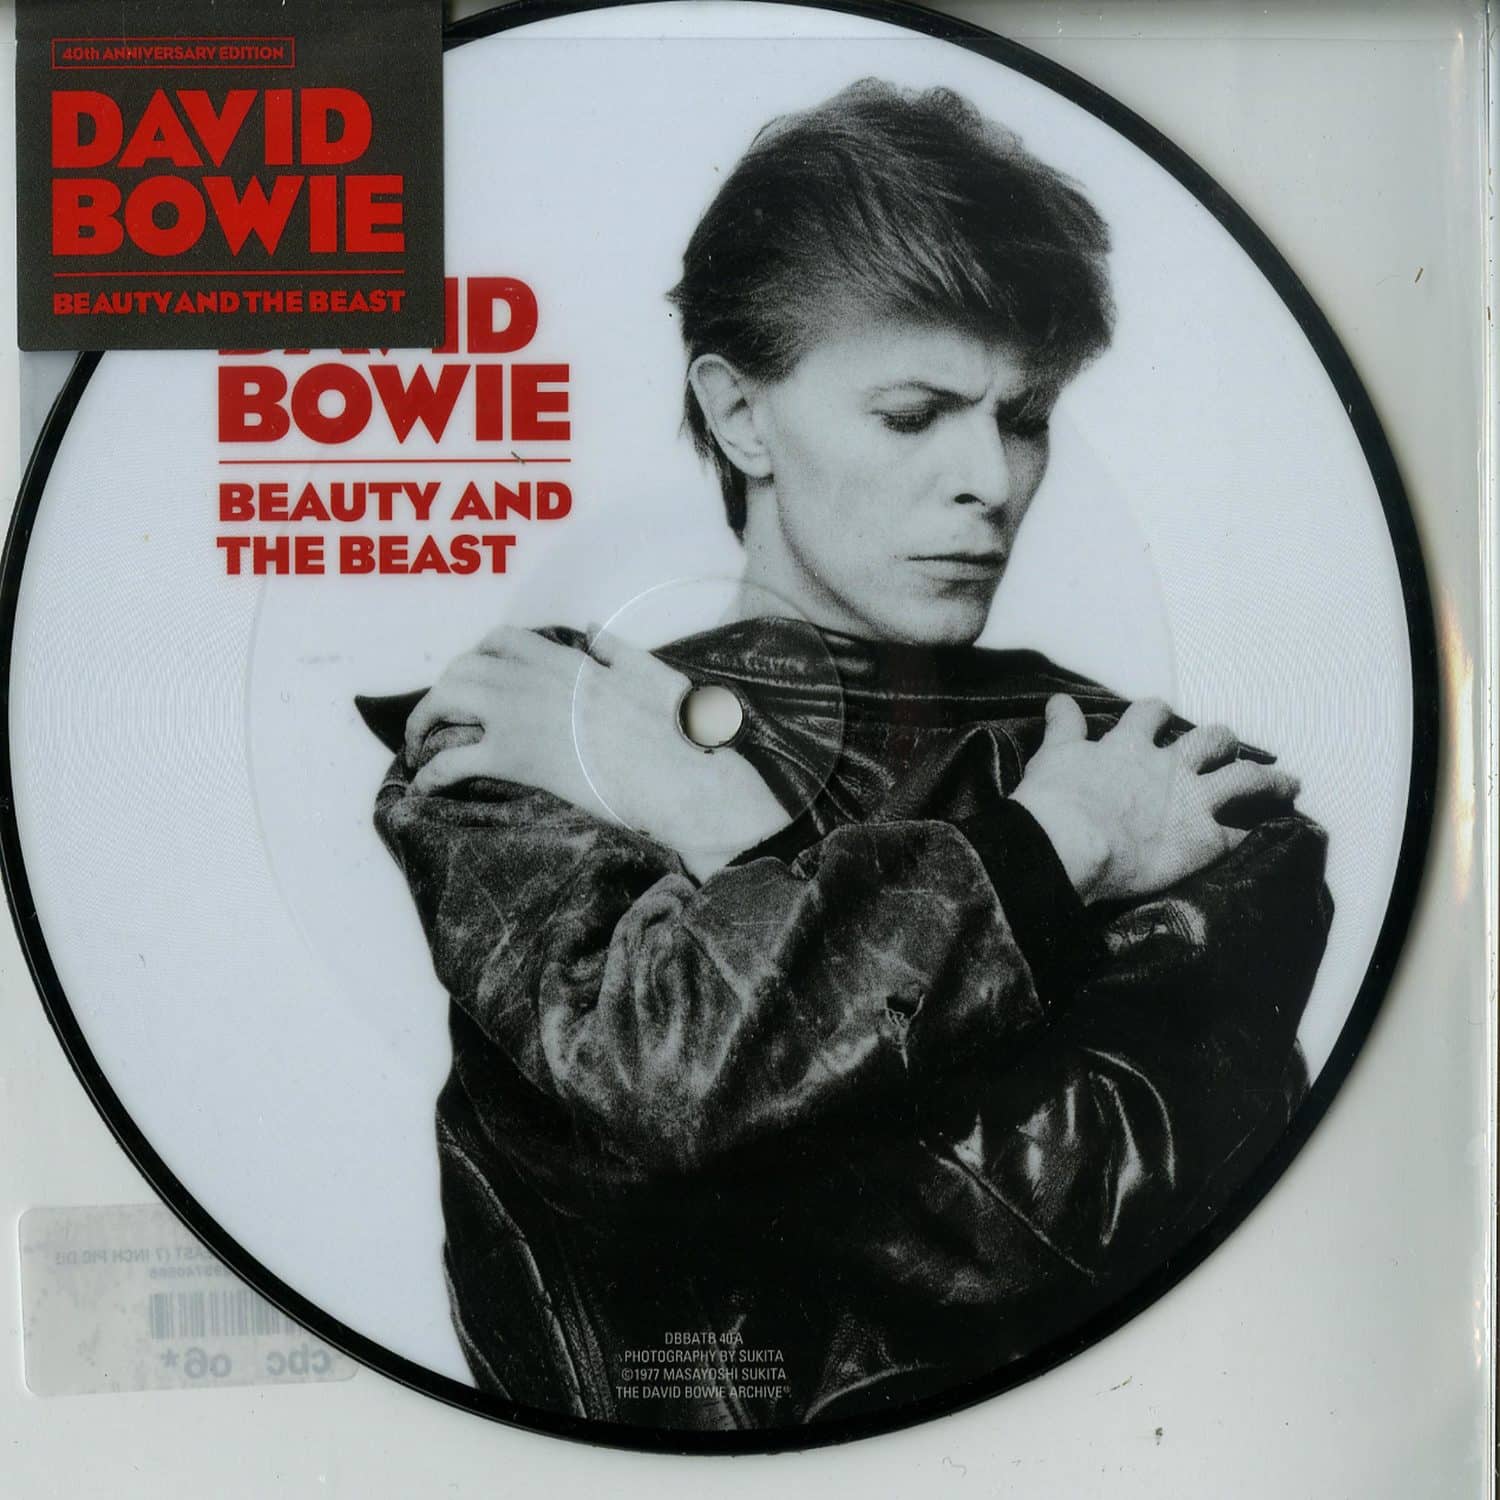 David Bowie - Heroes [40th Anniversary Limited Edition 7 Inch Picture Disc]  - Single